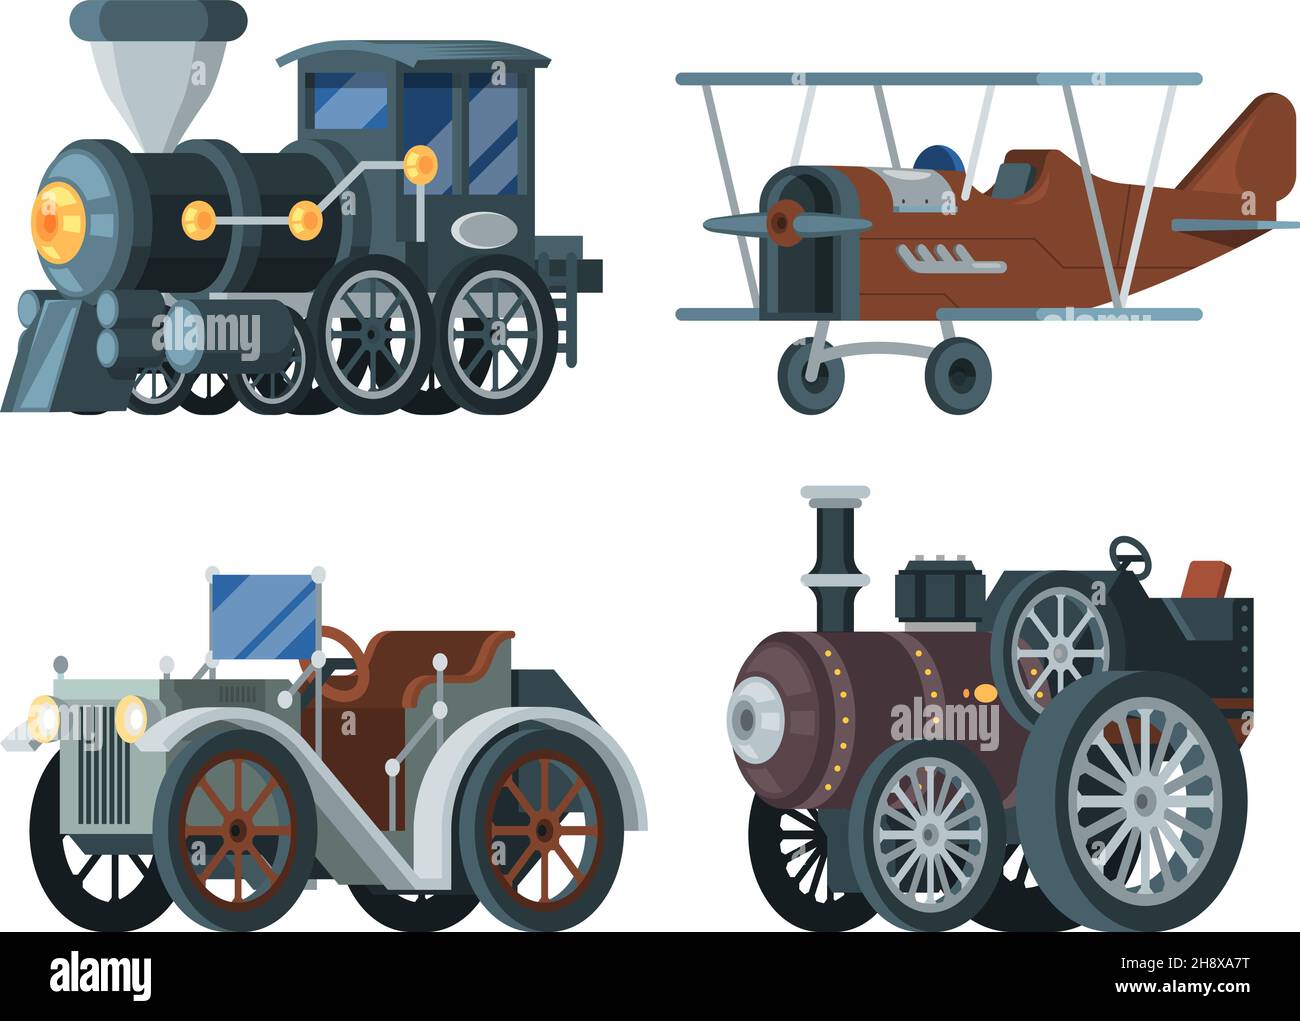 Vintage transport. Old retro passenger cars locomotive trucks carriage train airplanes garish vector flat vehicles collection Stock Vector